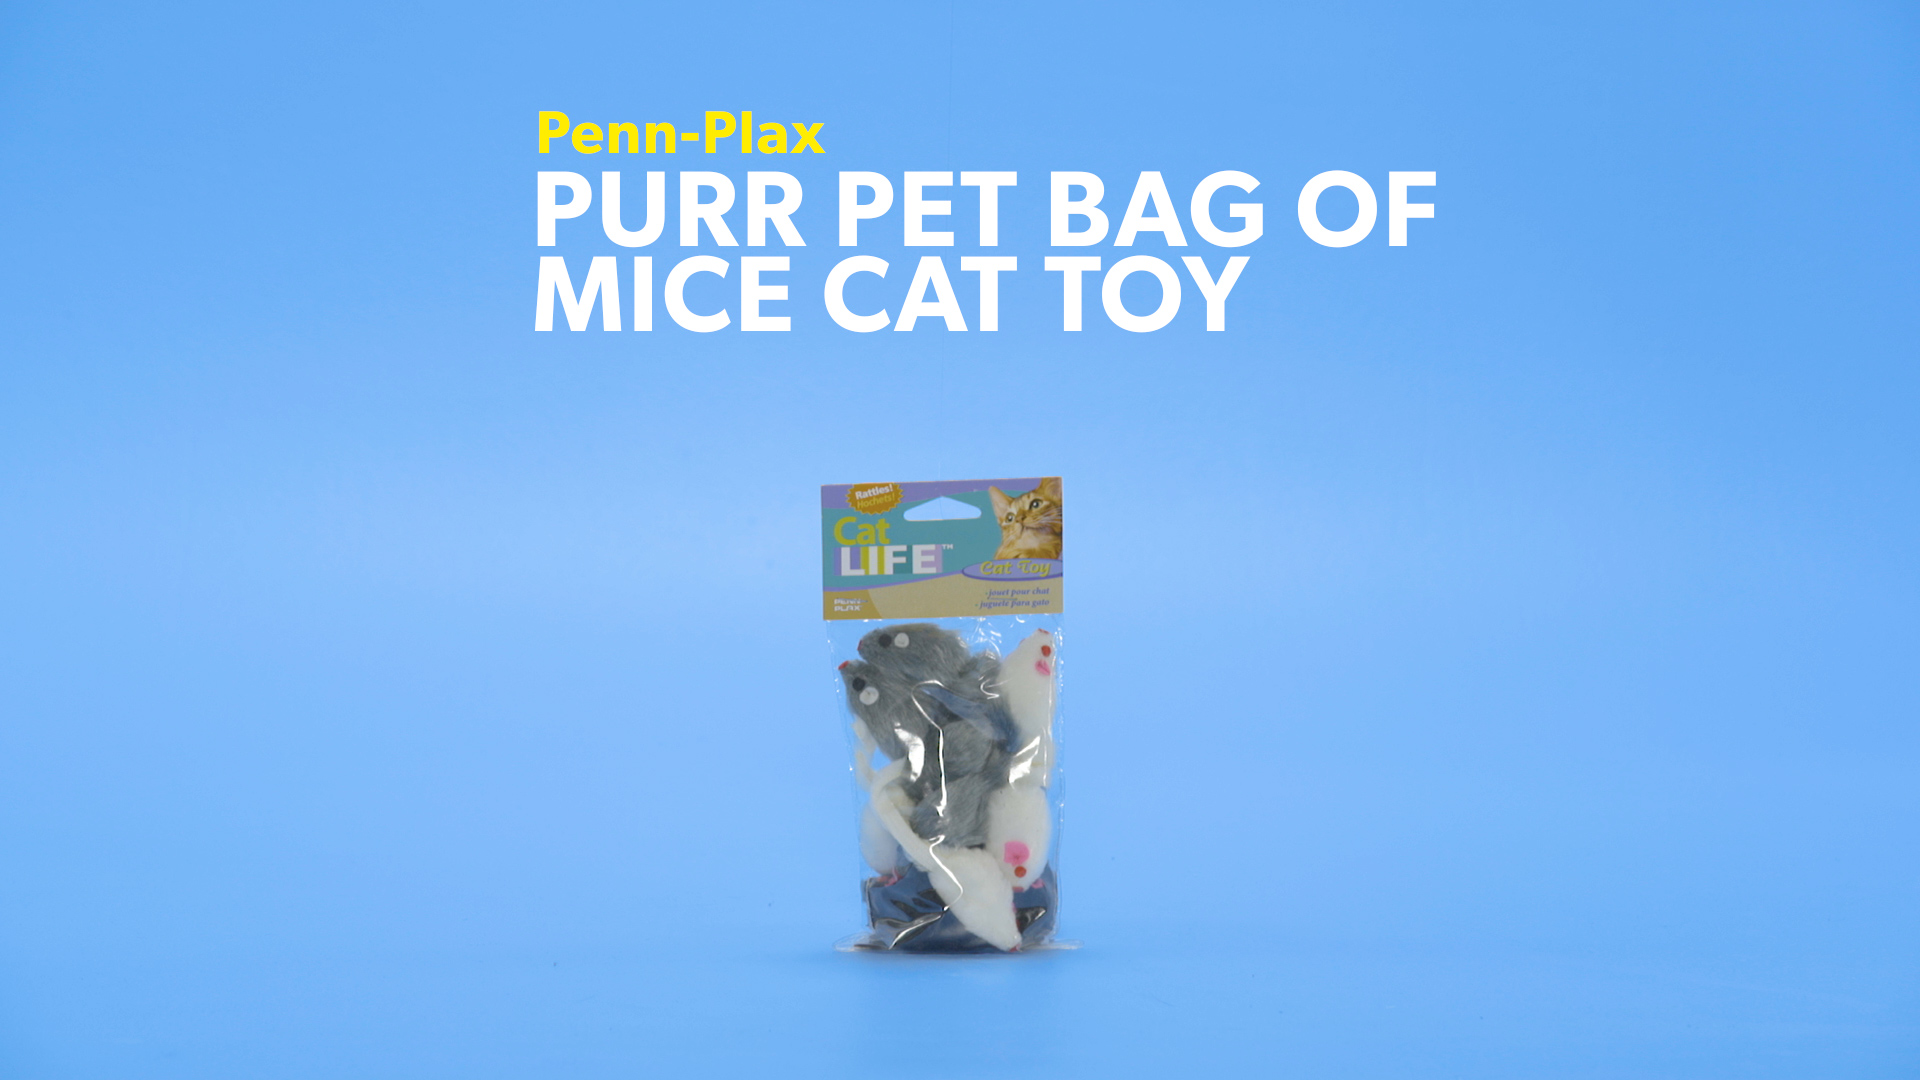 Black and White 3 Color Variety Pack CAT531 Penn Plax Play Fur Mice Cat Toys Mixed Bag of 12 Play Mice with Rattling Sounds 